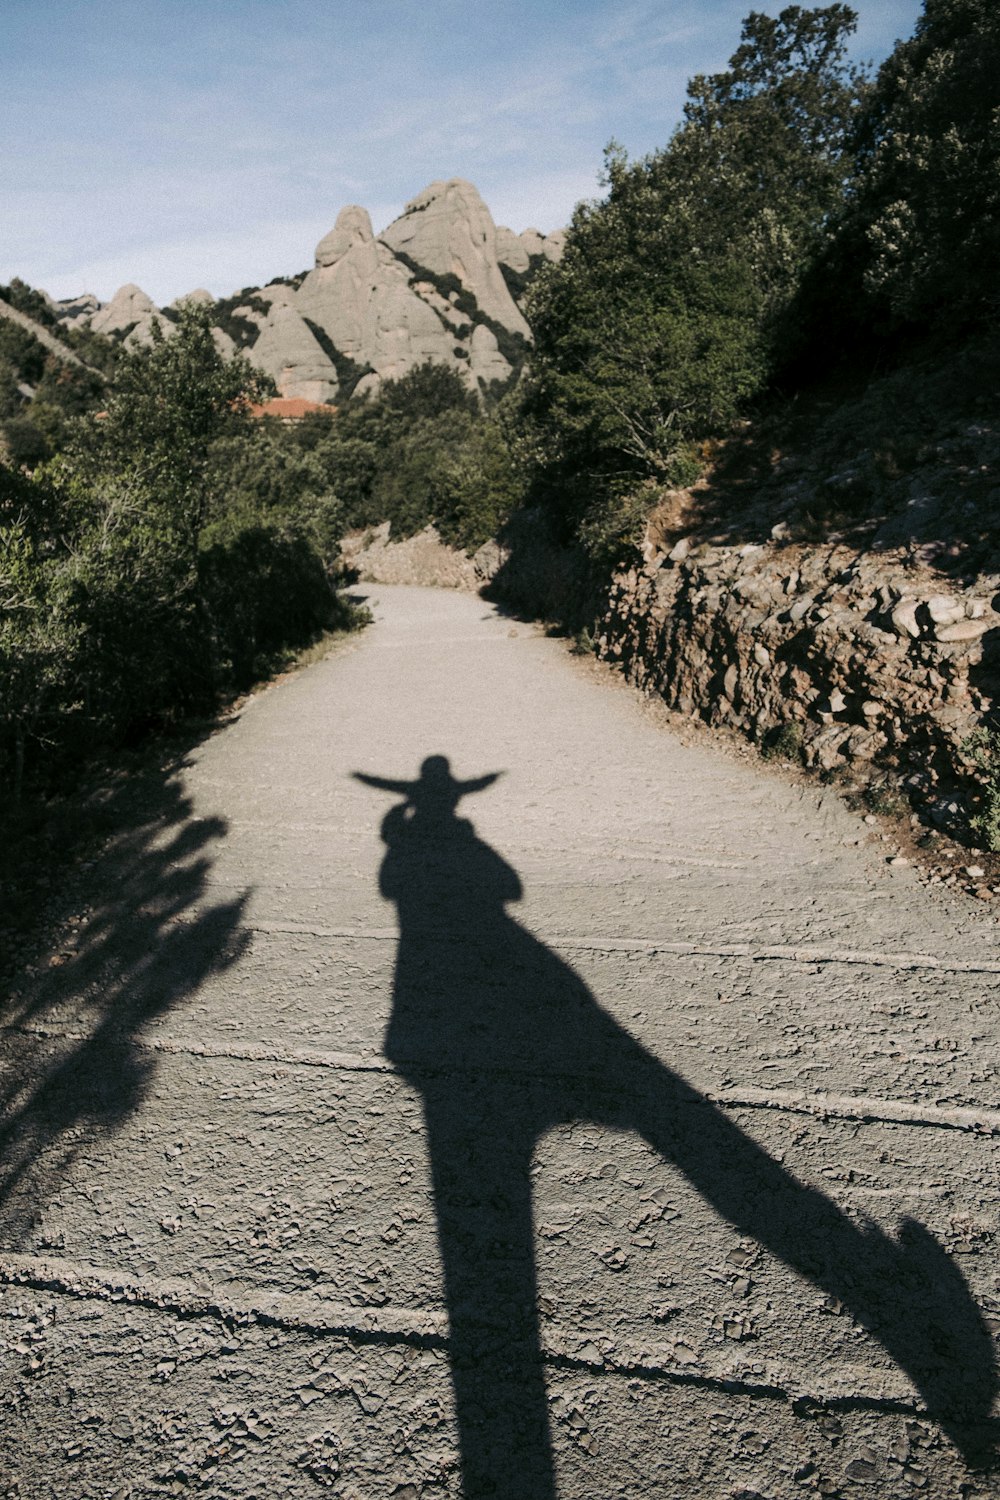 a person's shadow on a dirt road with trees and mountains in the background